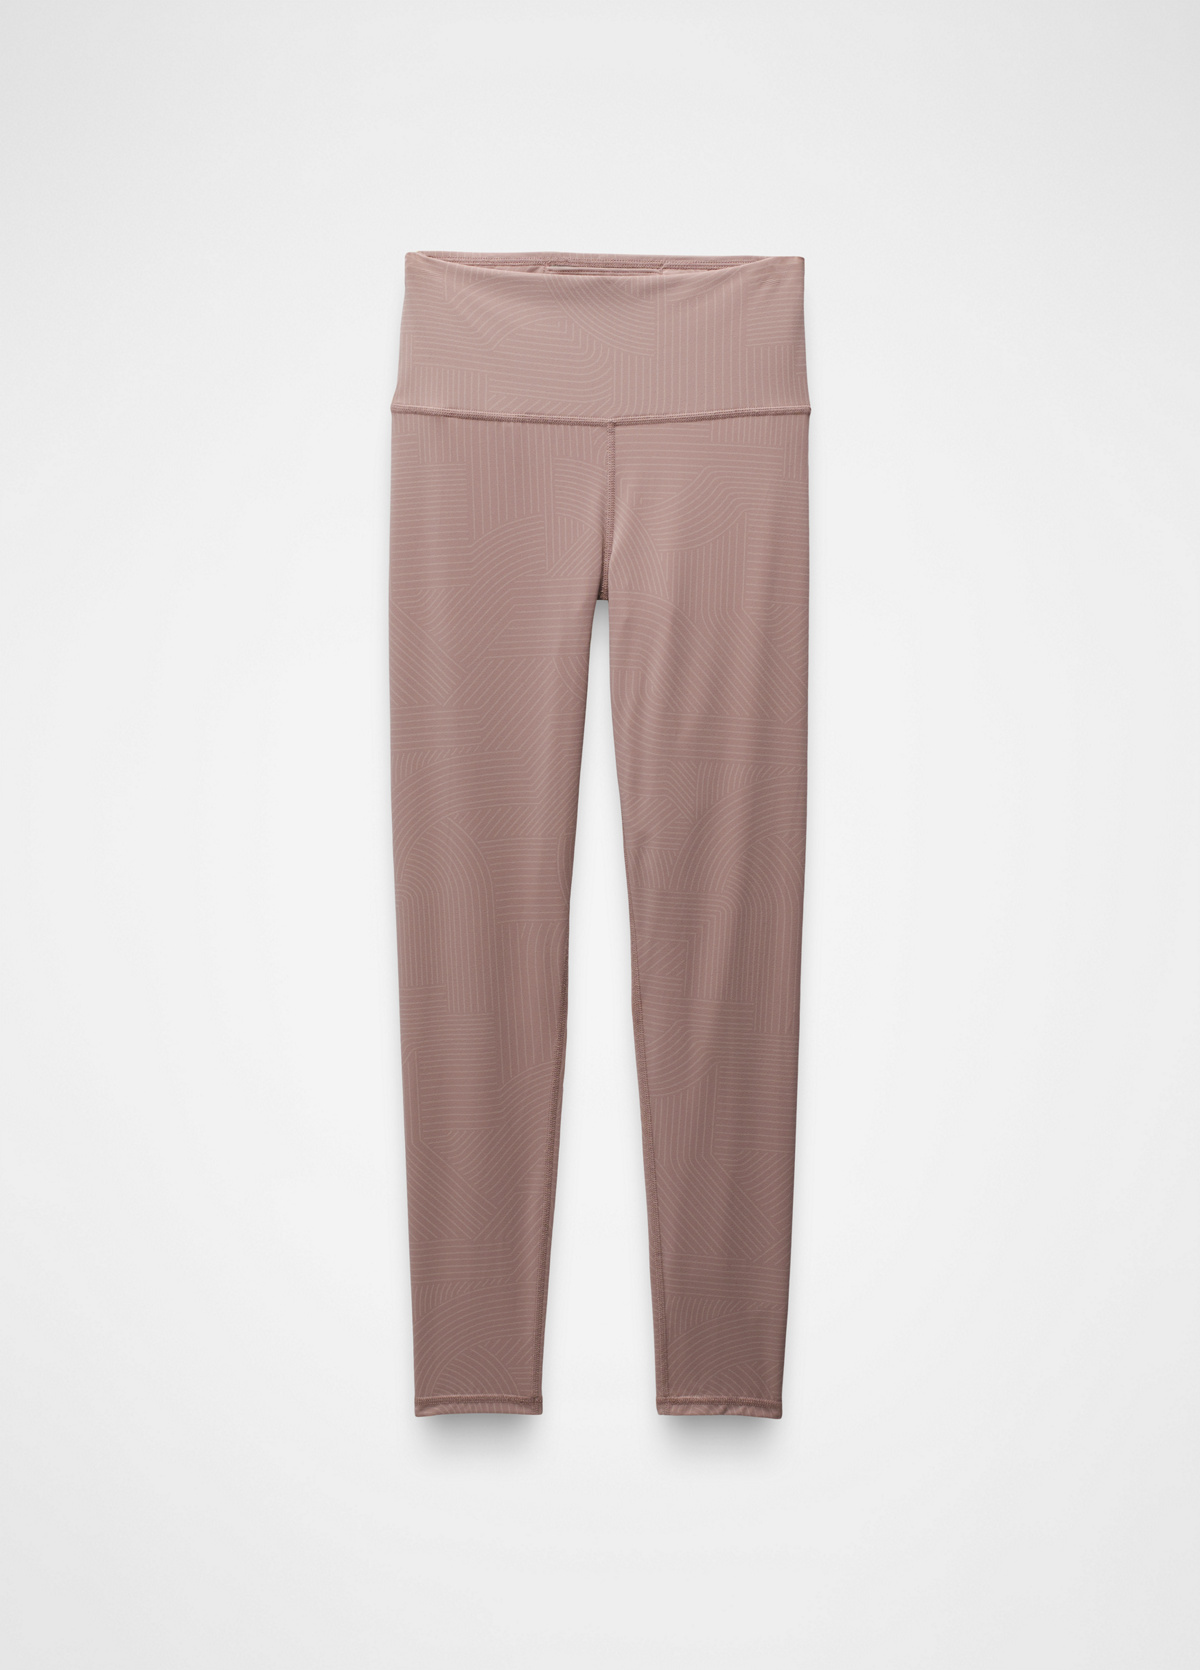 prAna Luxara 7/8 Legging - Women's - Al's Sporting Goods: Your One-Stop  Shop for Outdoor Sports Gear & Apparel